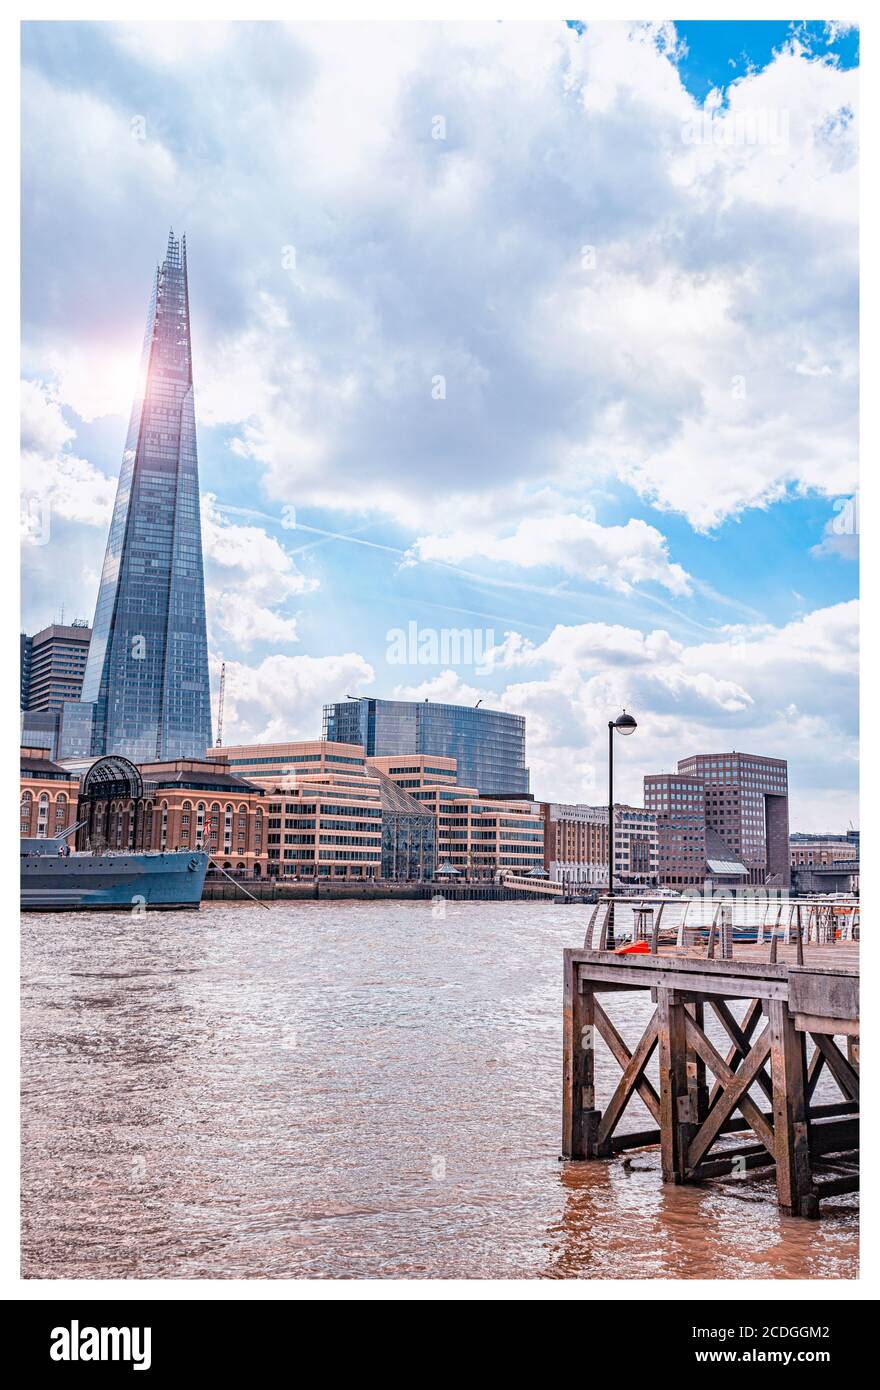 photography of london in high quality Stock Photo